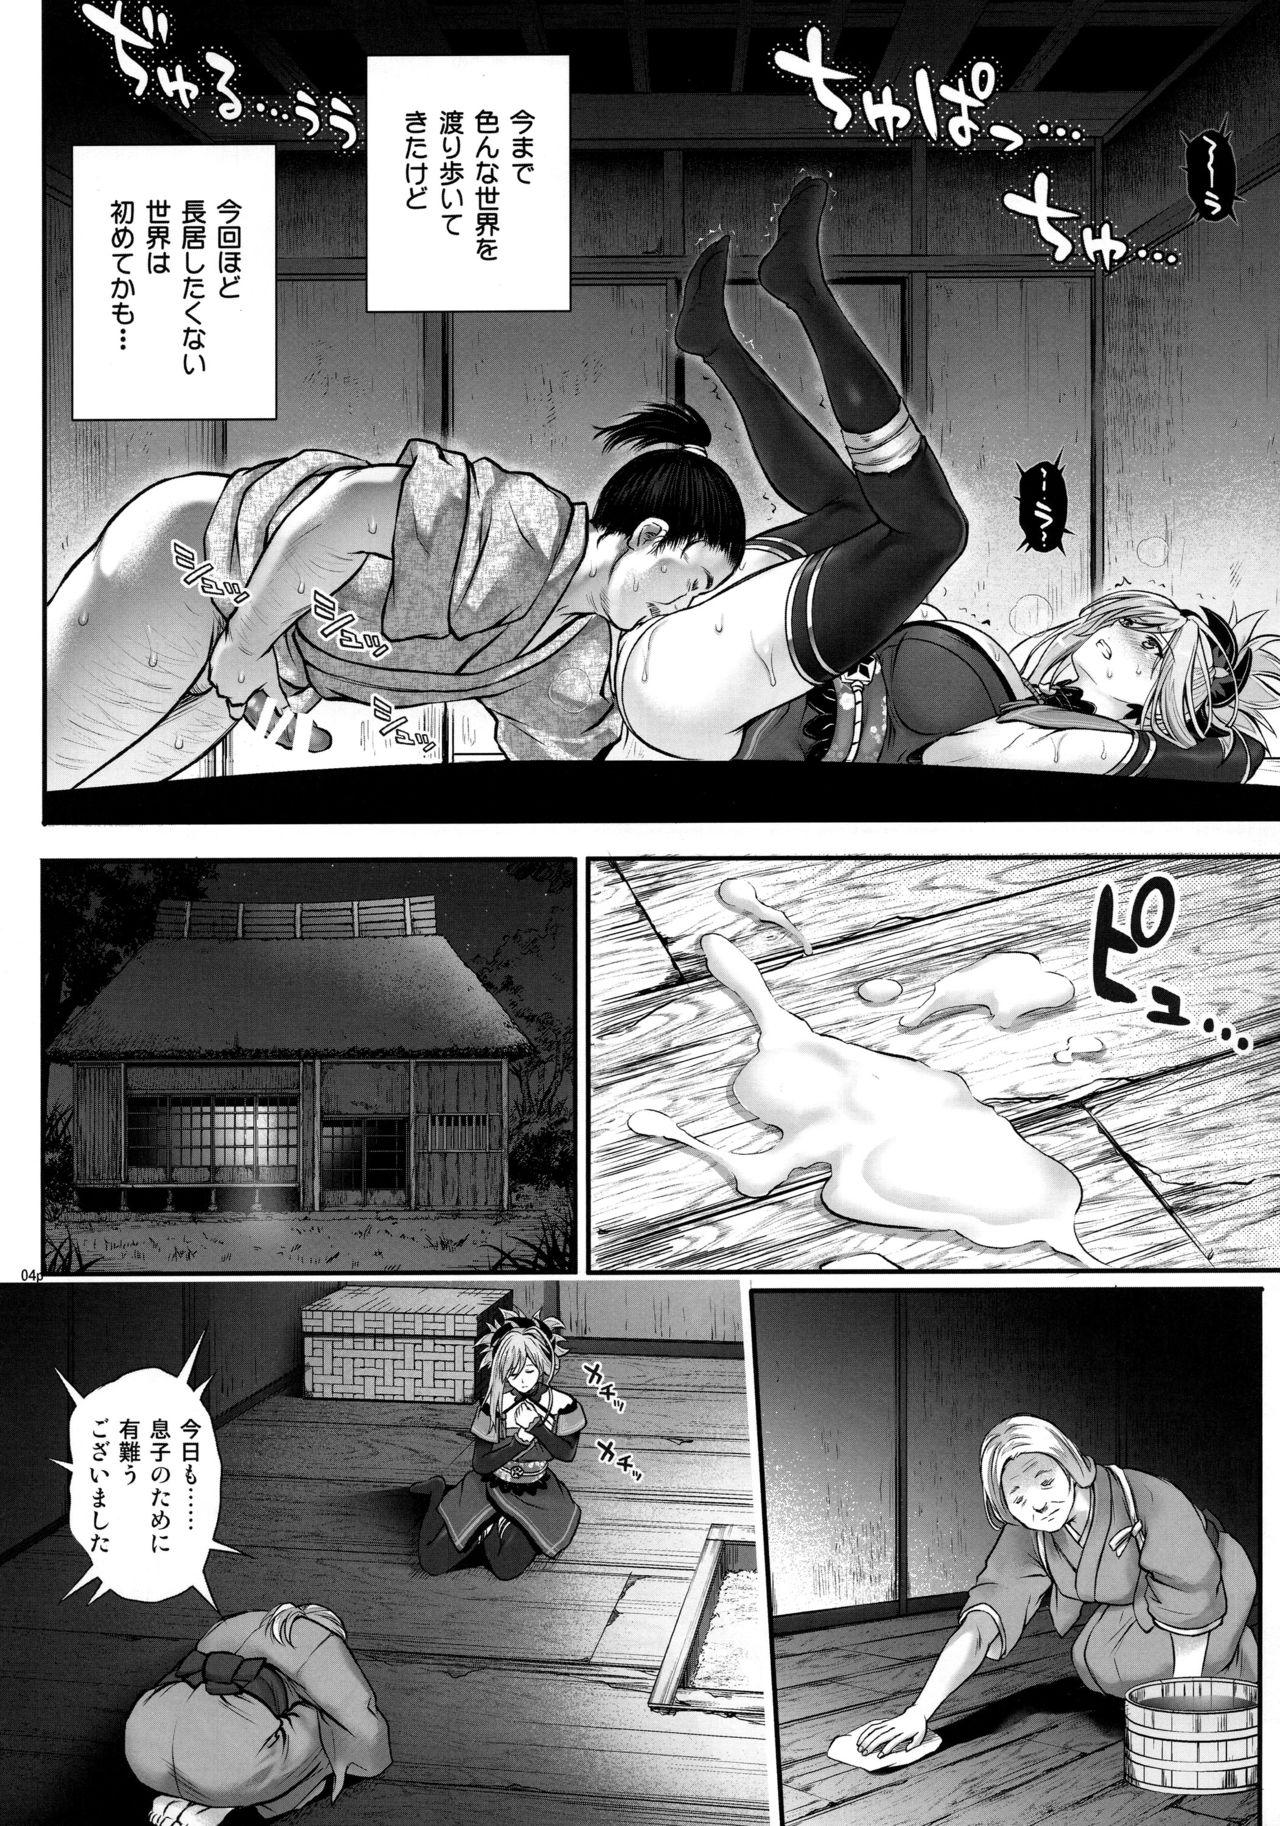 Dykes T-32 hooollow - Fate grand order Black Dick - Page 4